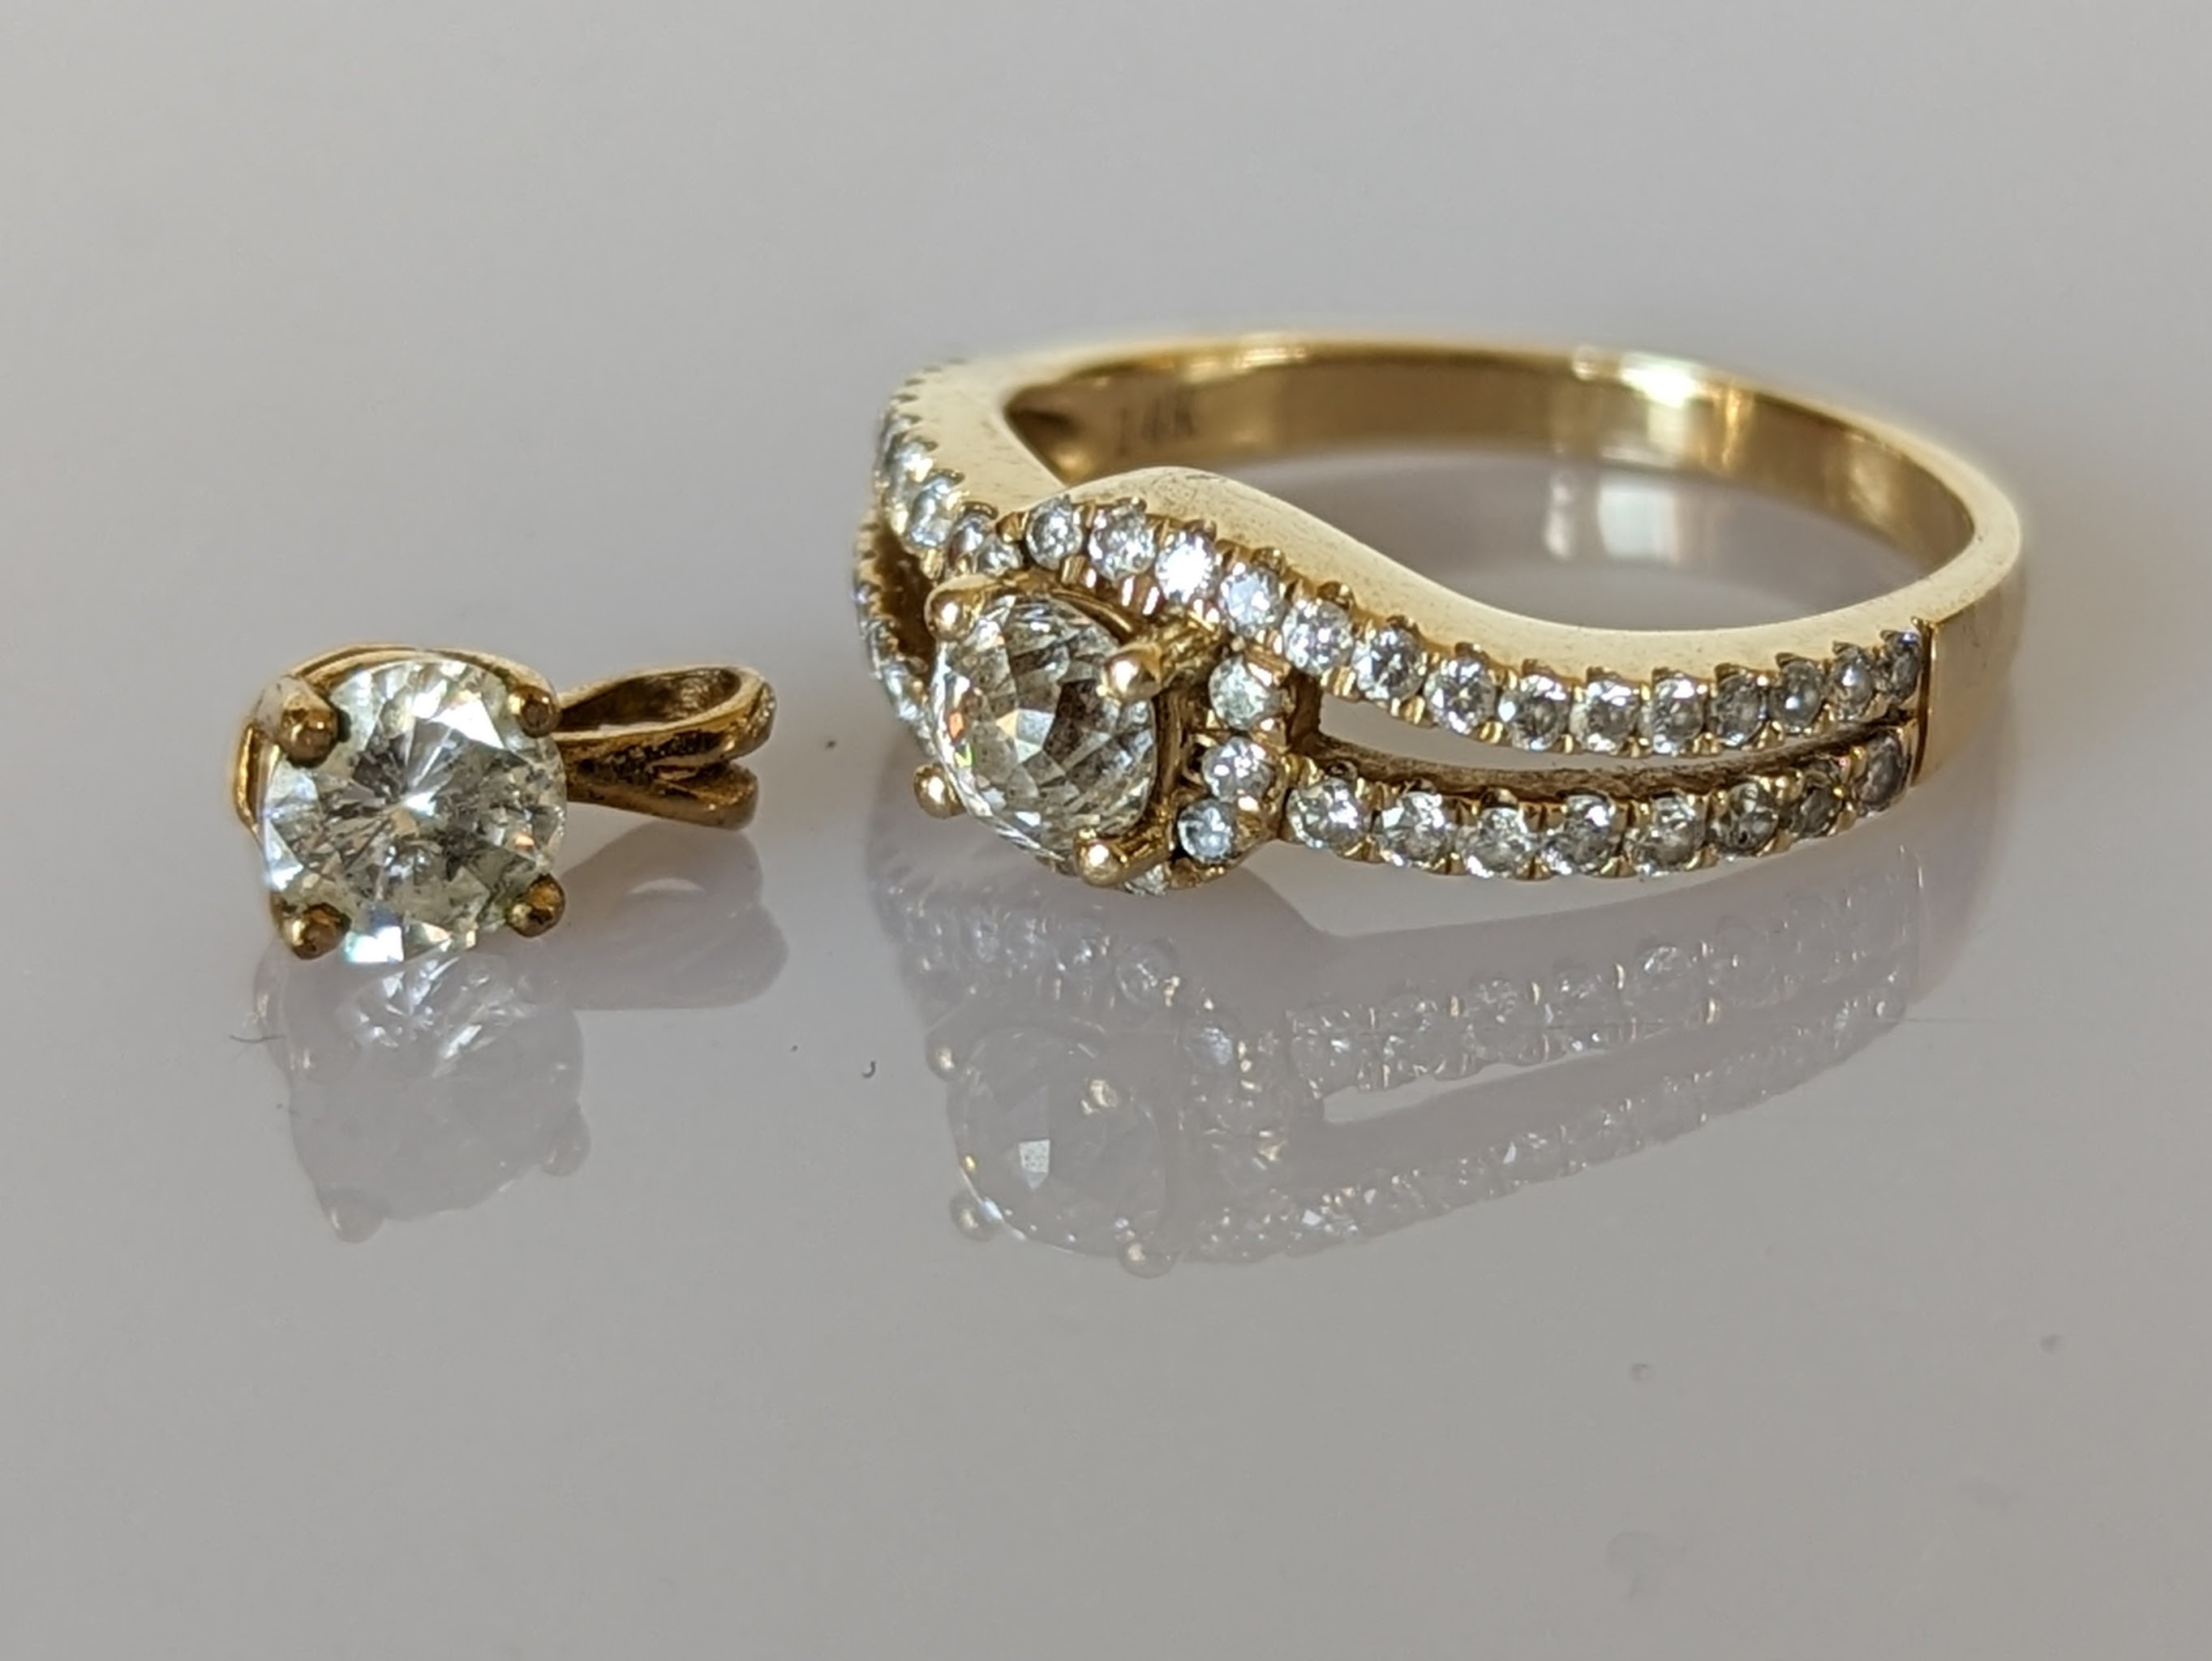 A solitaire diamond ring with split shoulder shank, decorated with diamonds to both sides